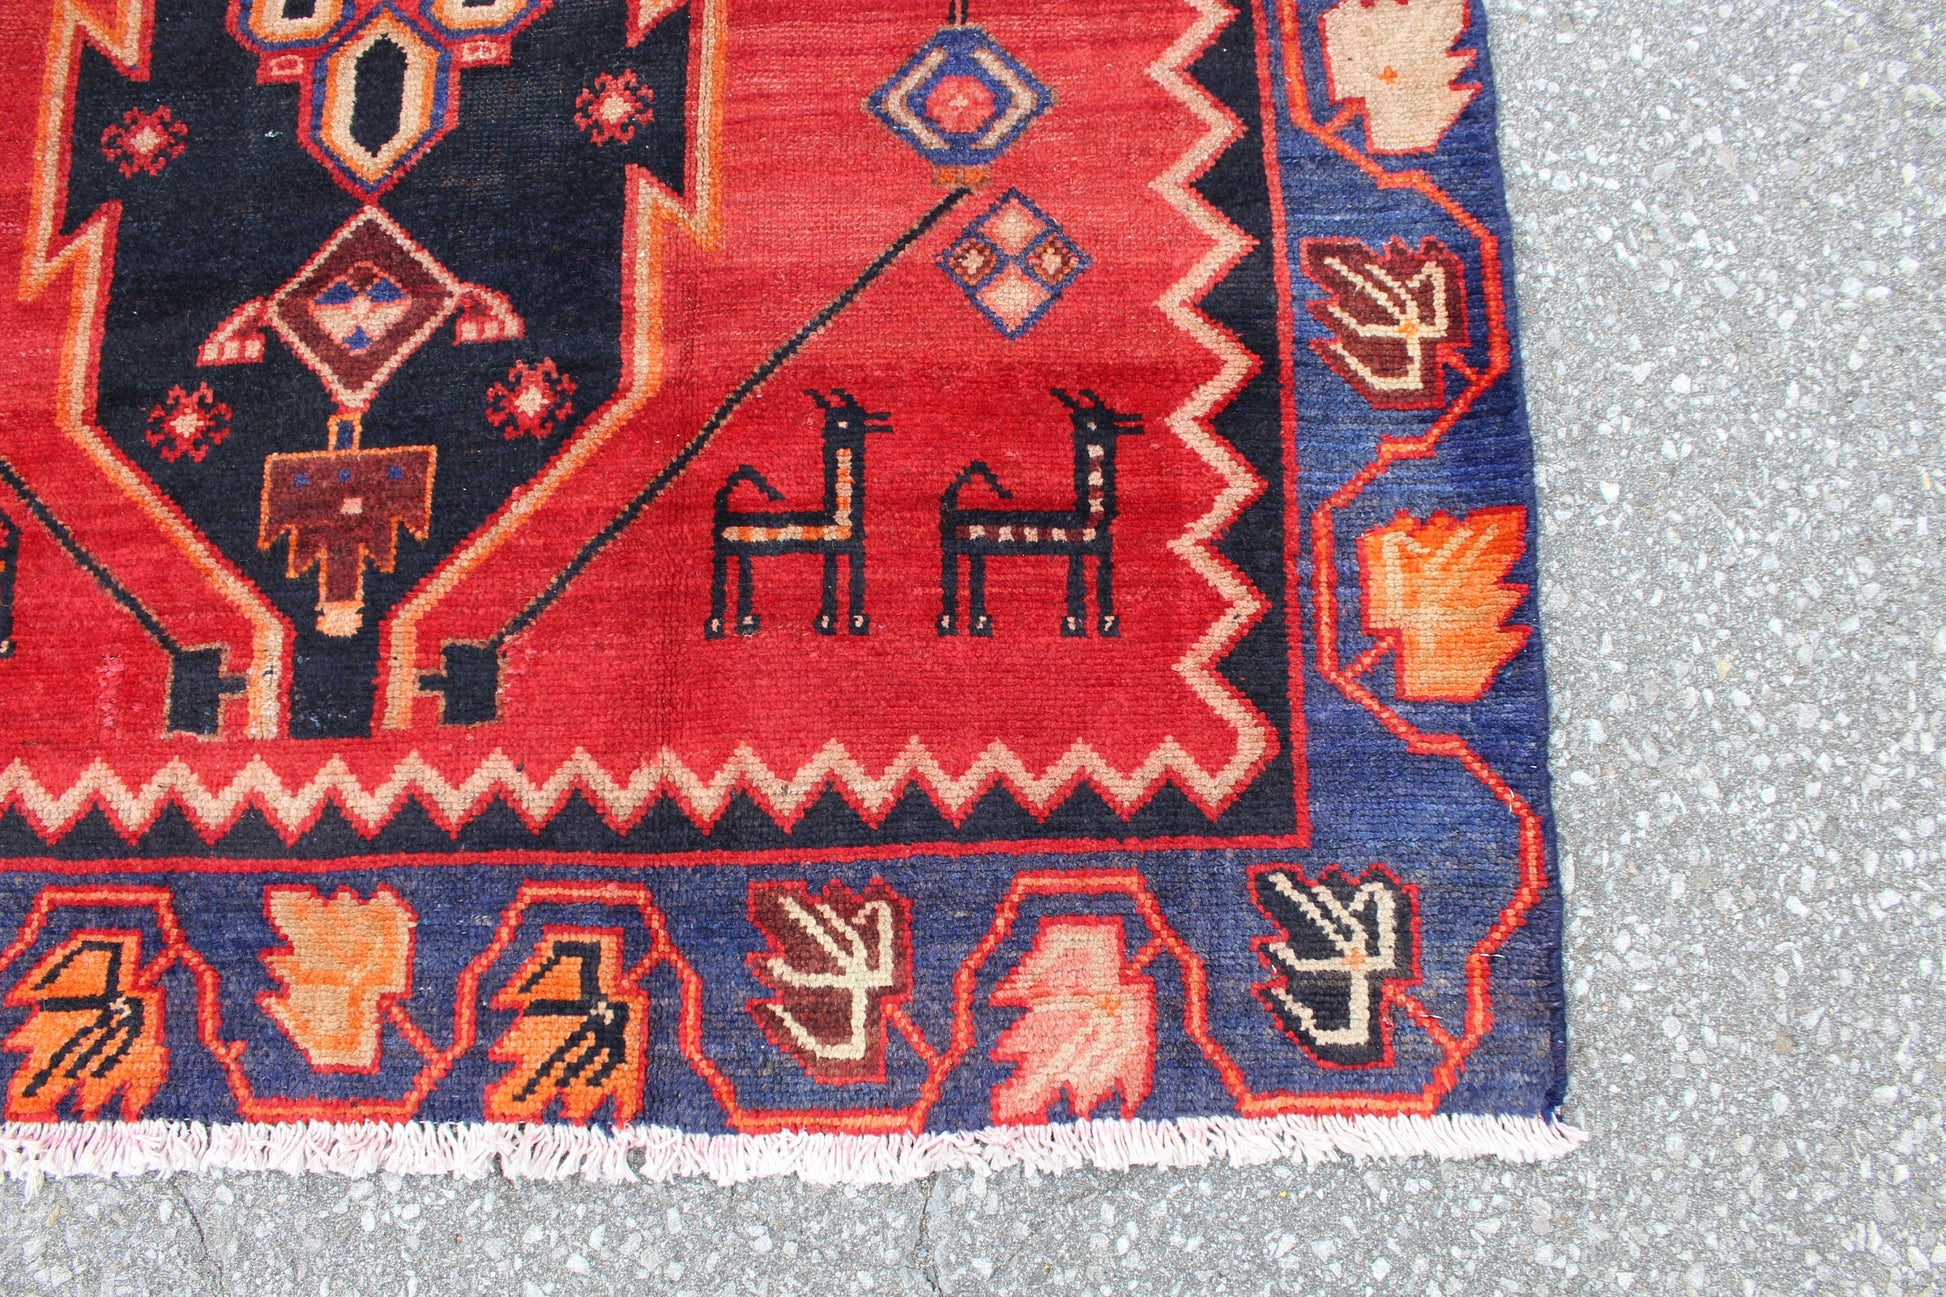 Red Tribal 4x6 Southwestern Style Area Rug with Blue Border